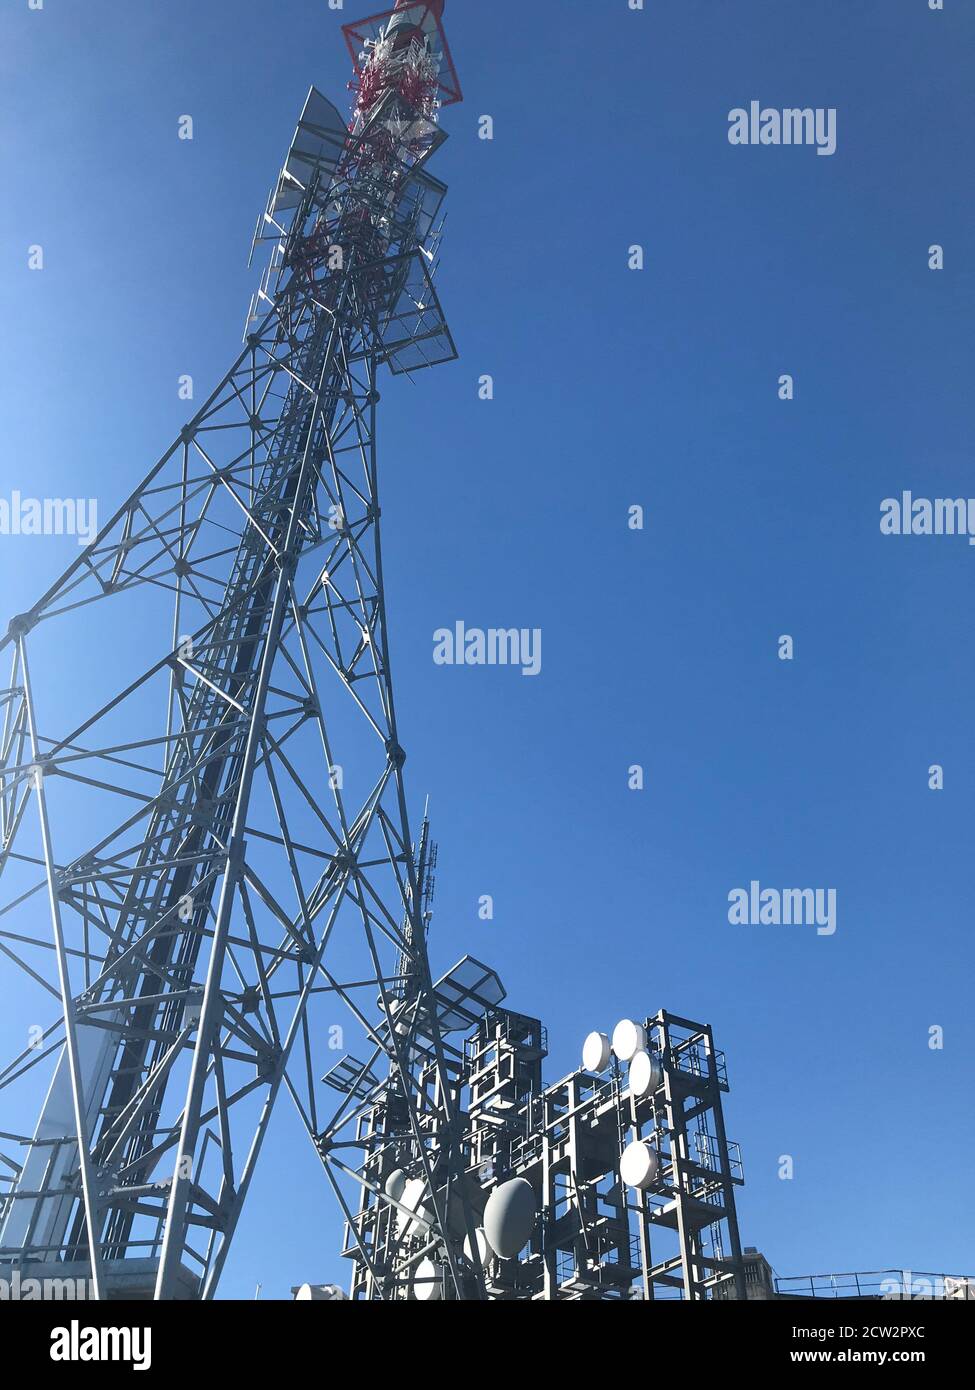 Contrast between technology and nature: The broadcasting tower on the top of the valais peak Gebidum Stock Photo